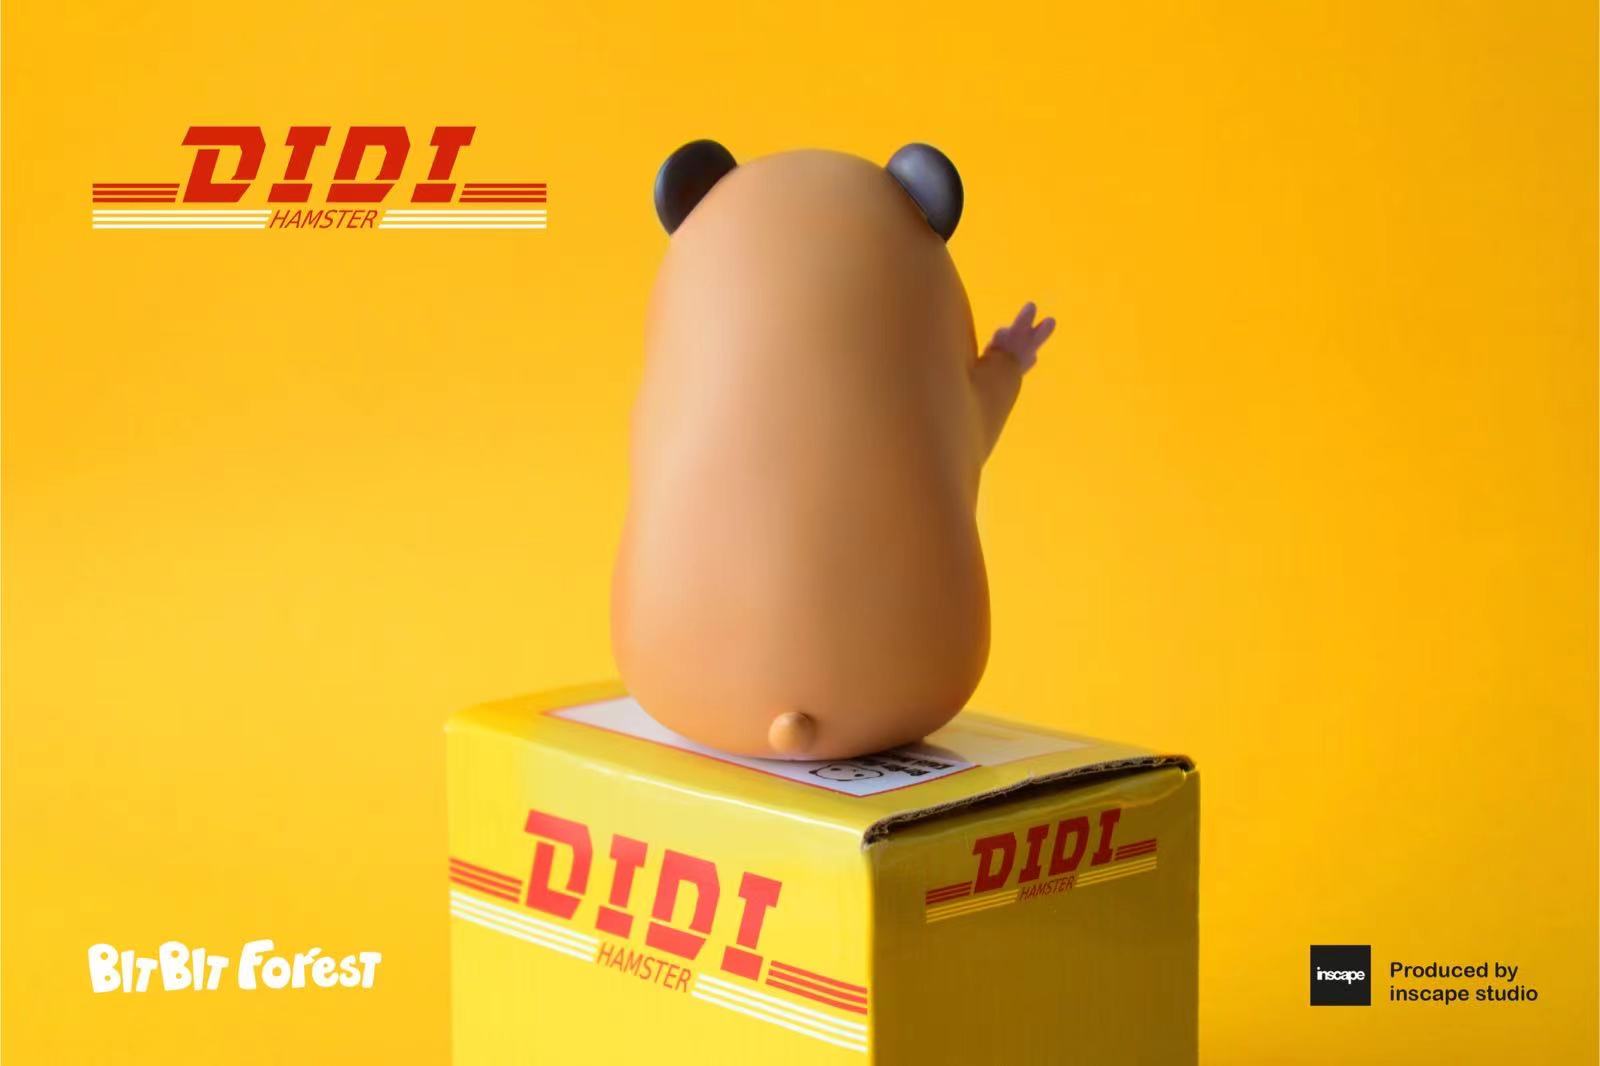 DiDi Hamster by BitBit Forrest - Preorder